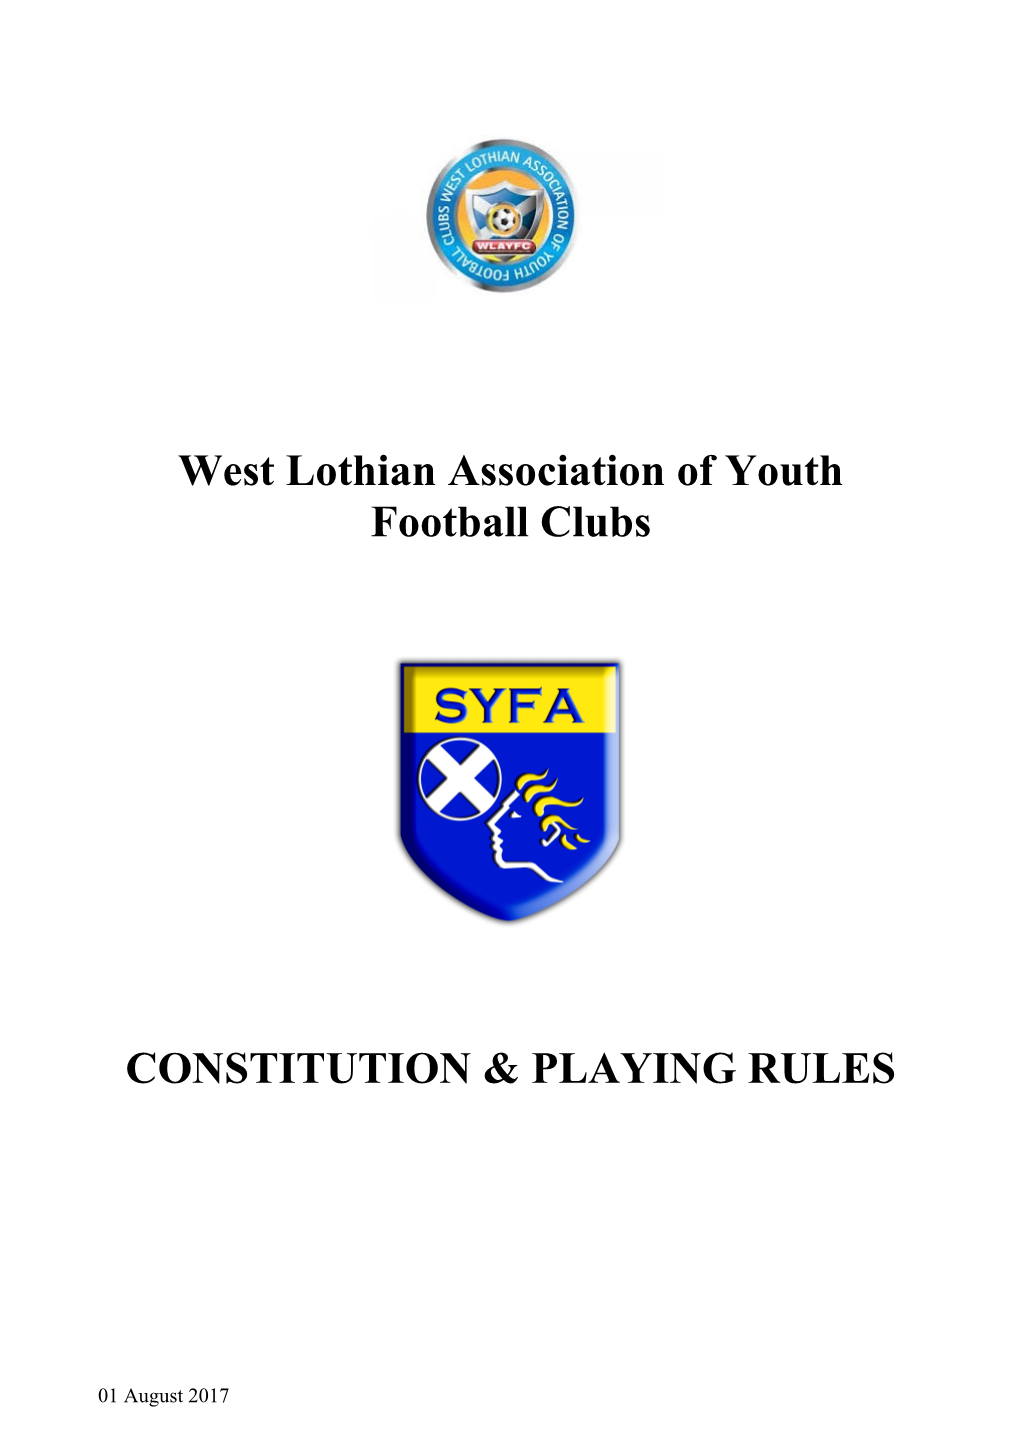 West Lothian Association of Youth Football Clubs